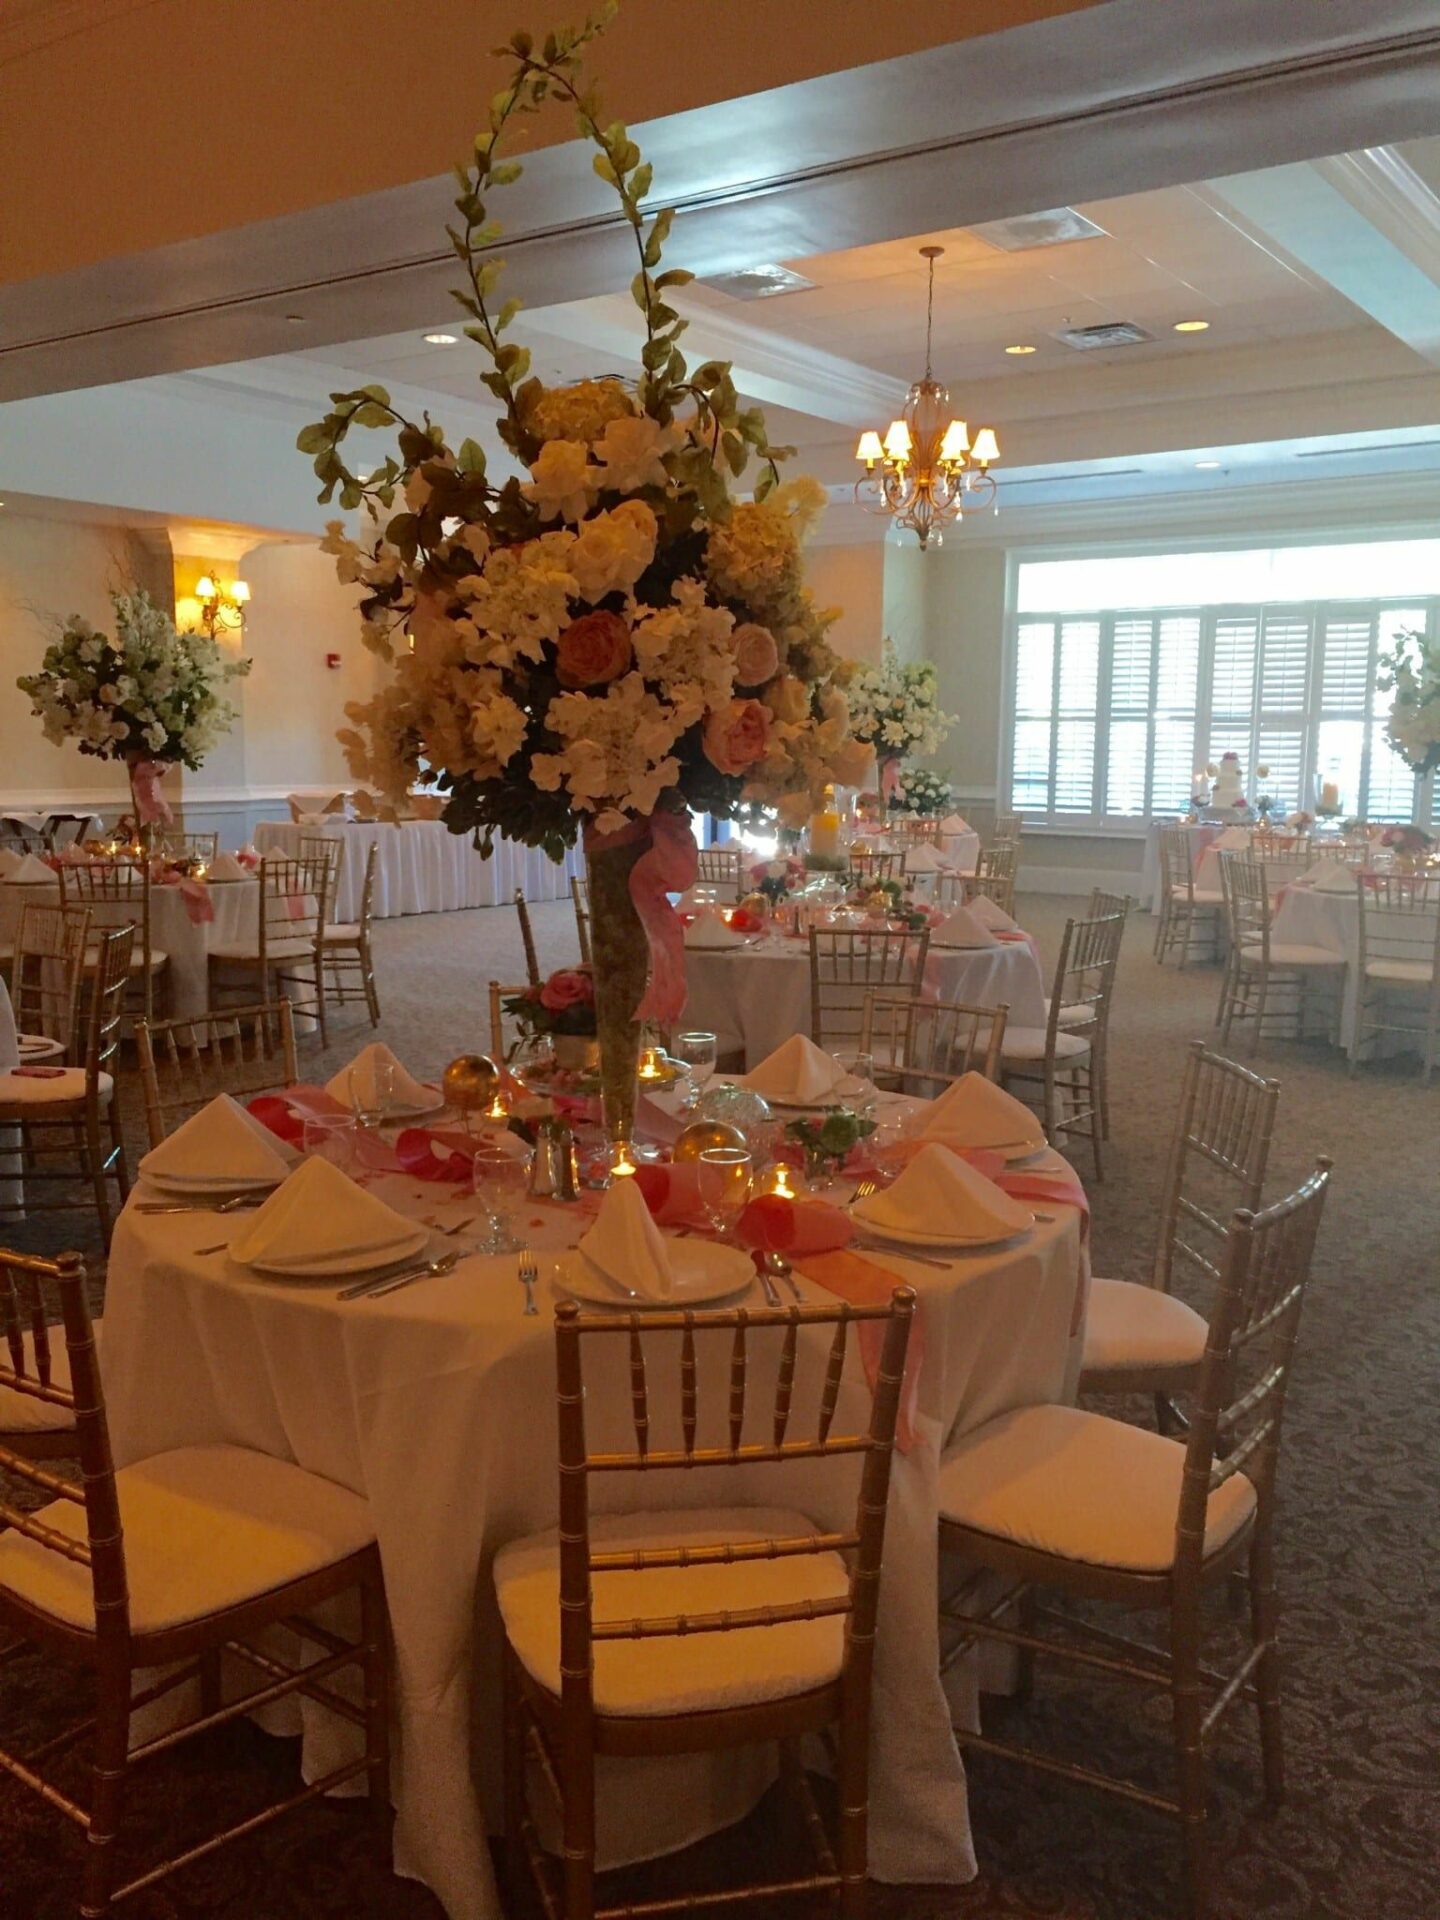 A large room with tables and chairs set up for a North Hills Club wedding.